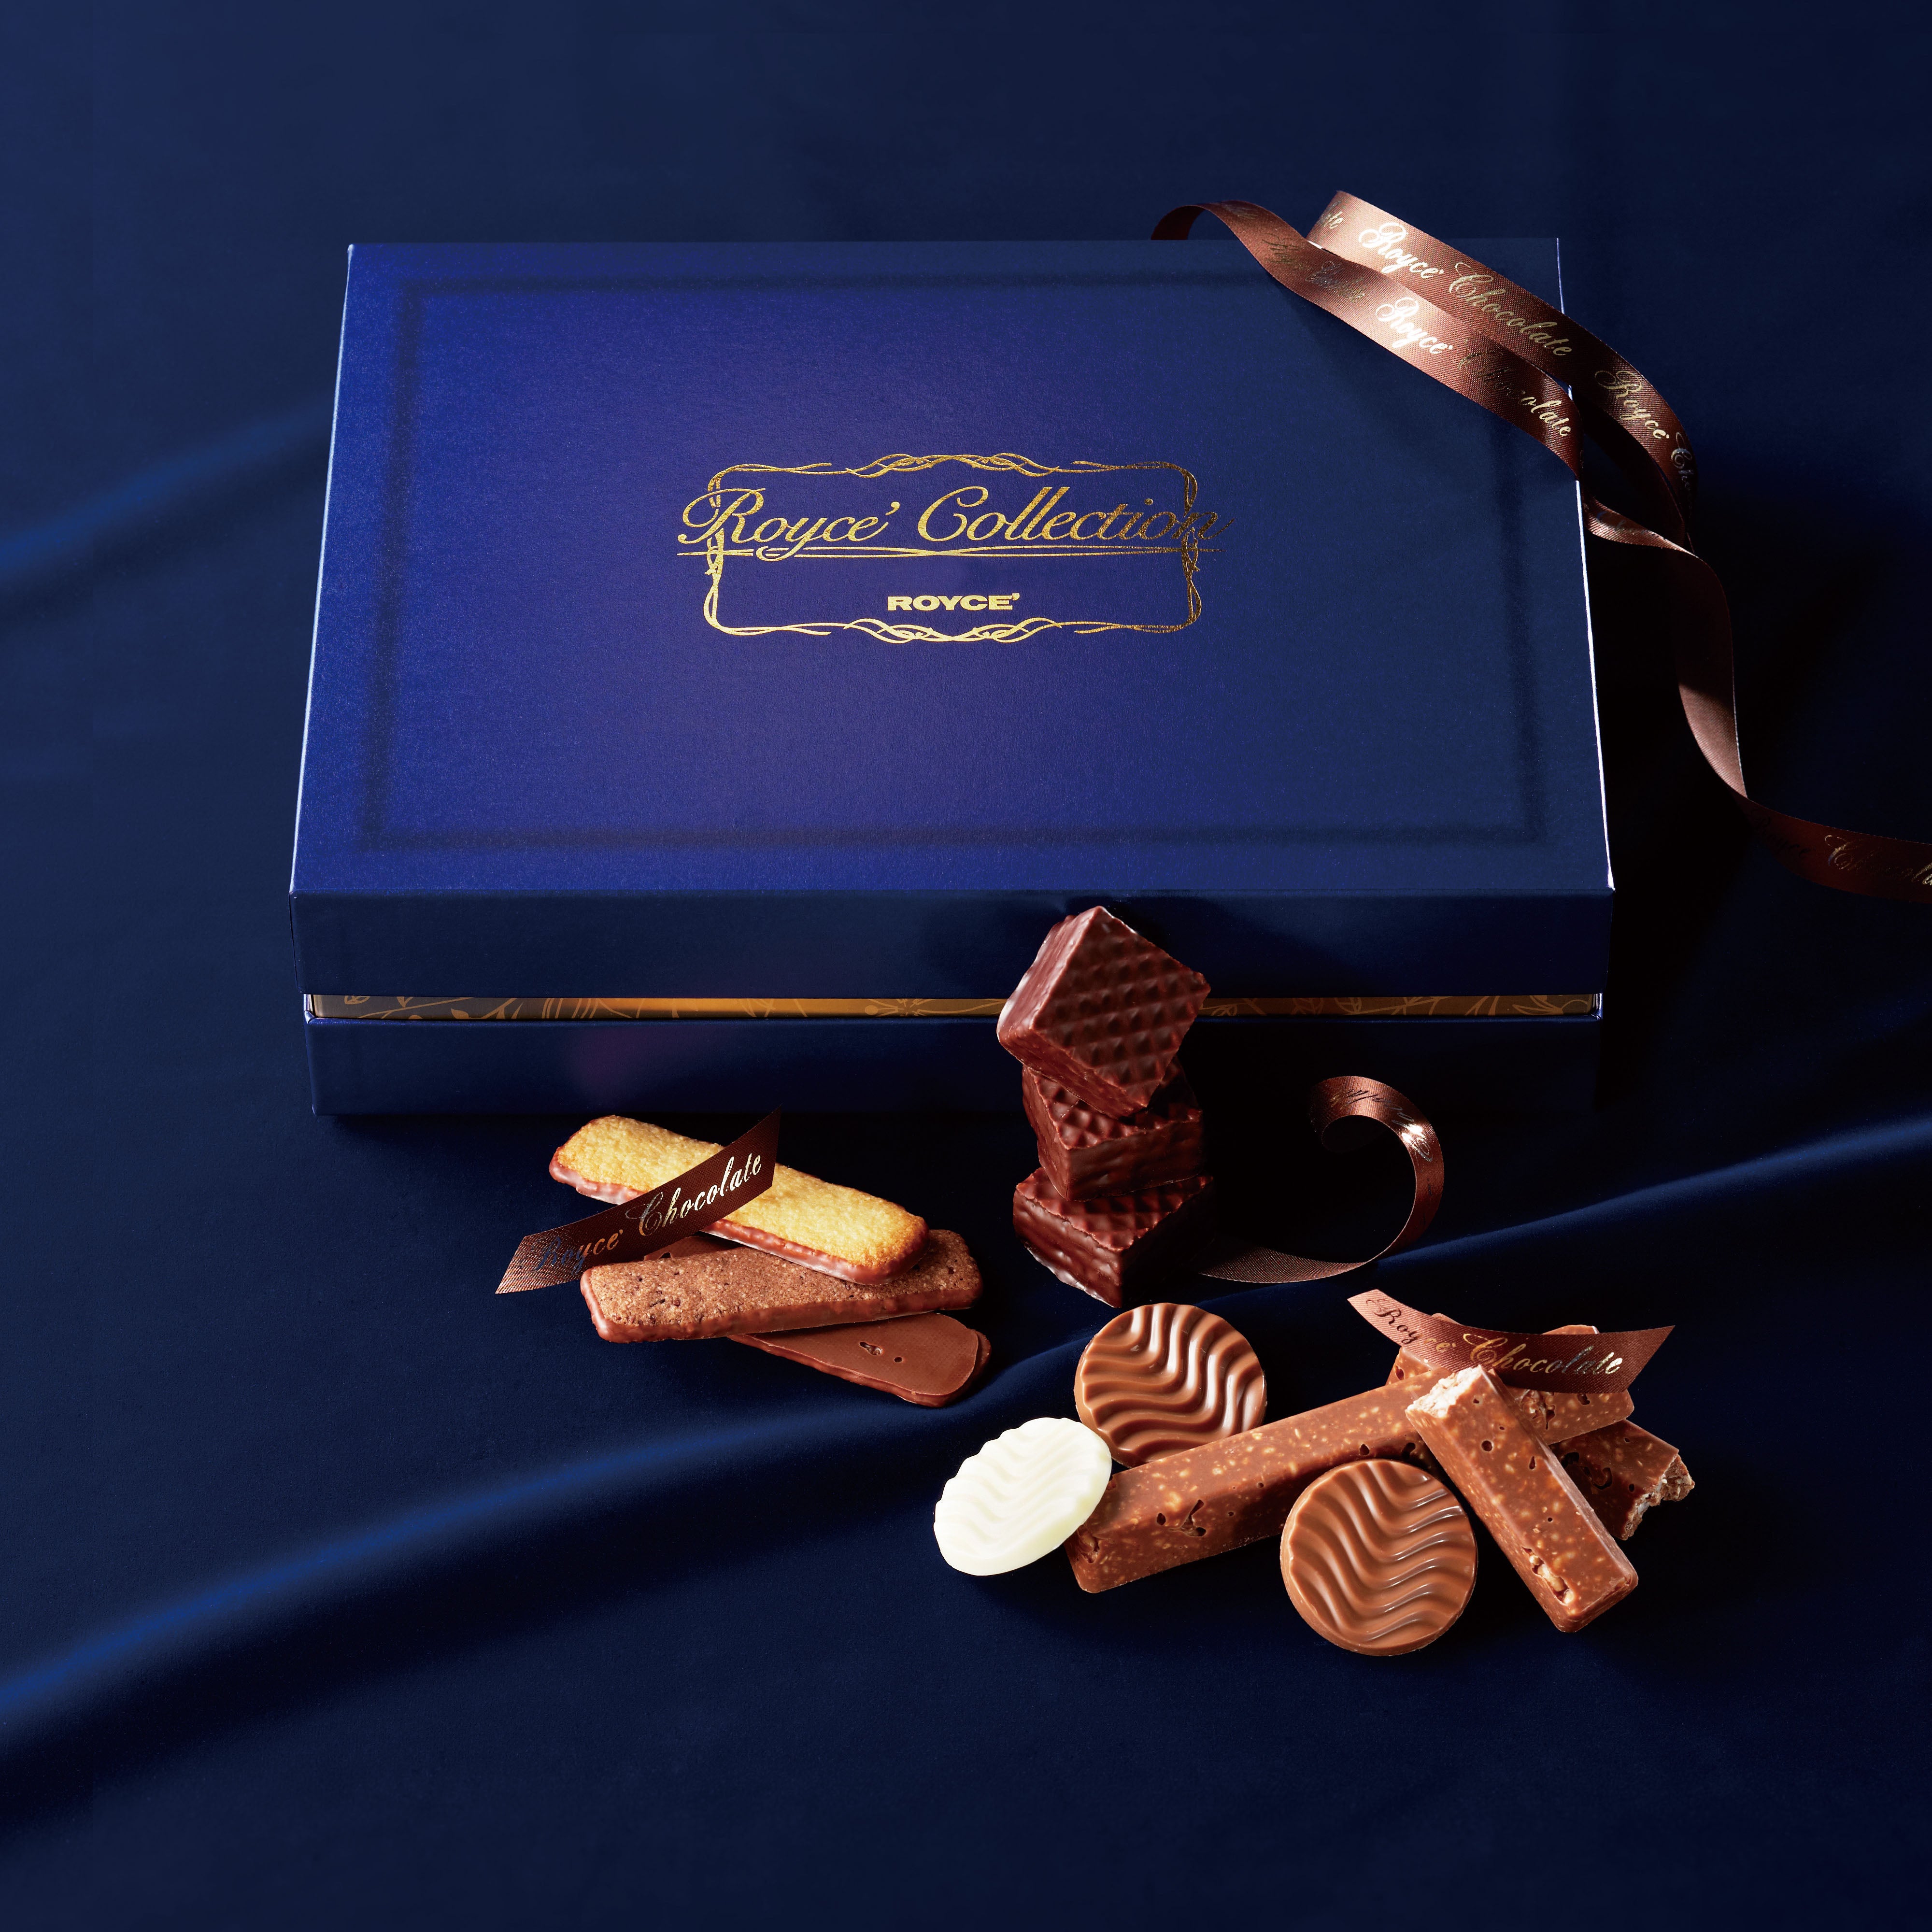 Image shows a blue box of ROYCE' Collection "Blue" with some chocolates and ribbons.